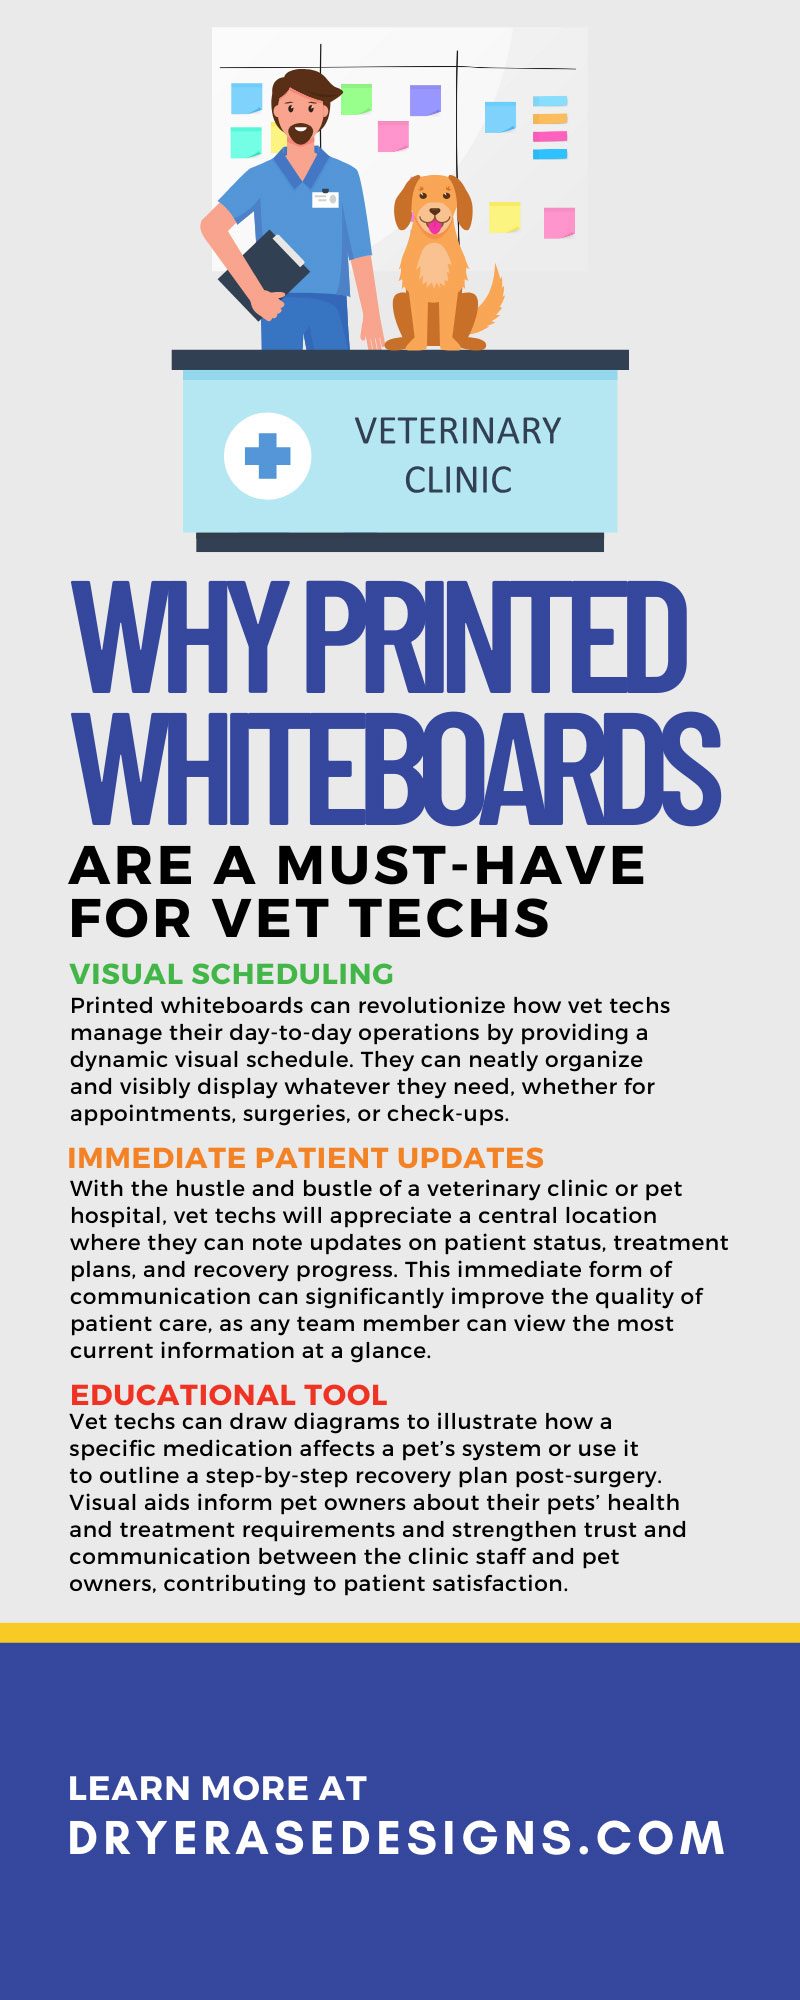 Why Printed Whiteboards Are a Must-Have for Vet Techs